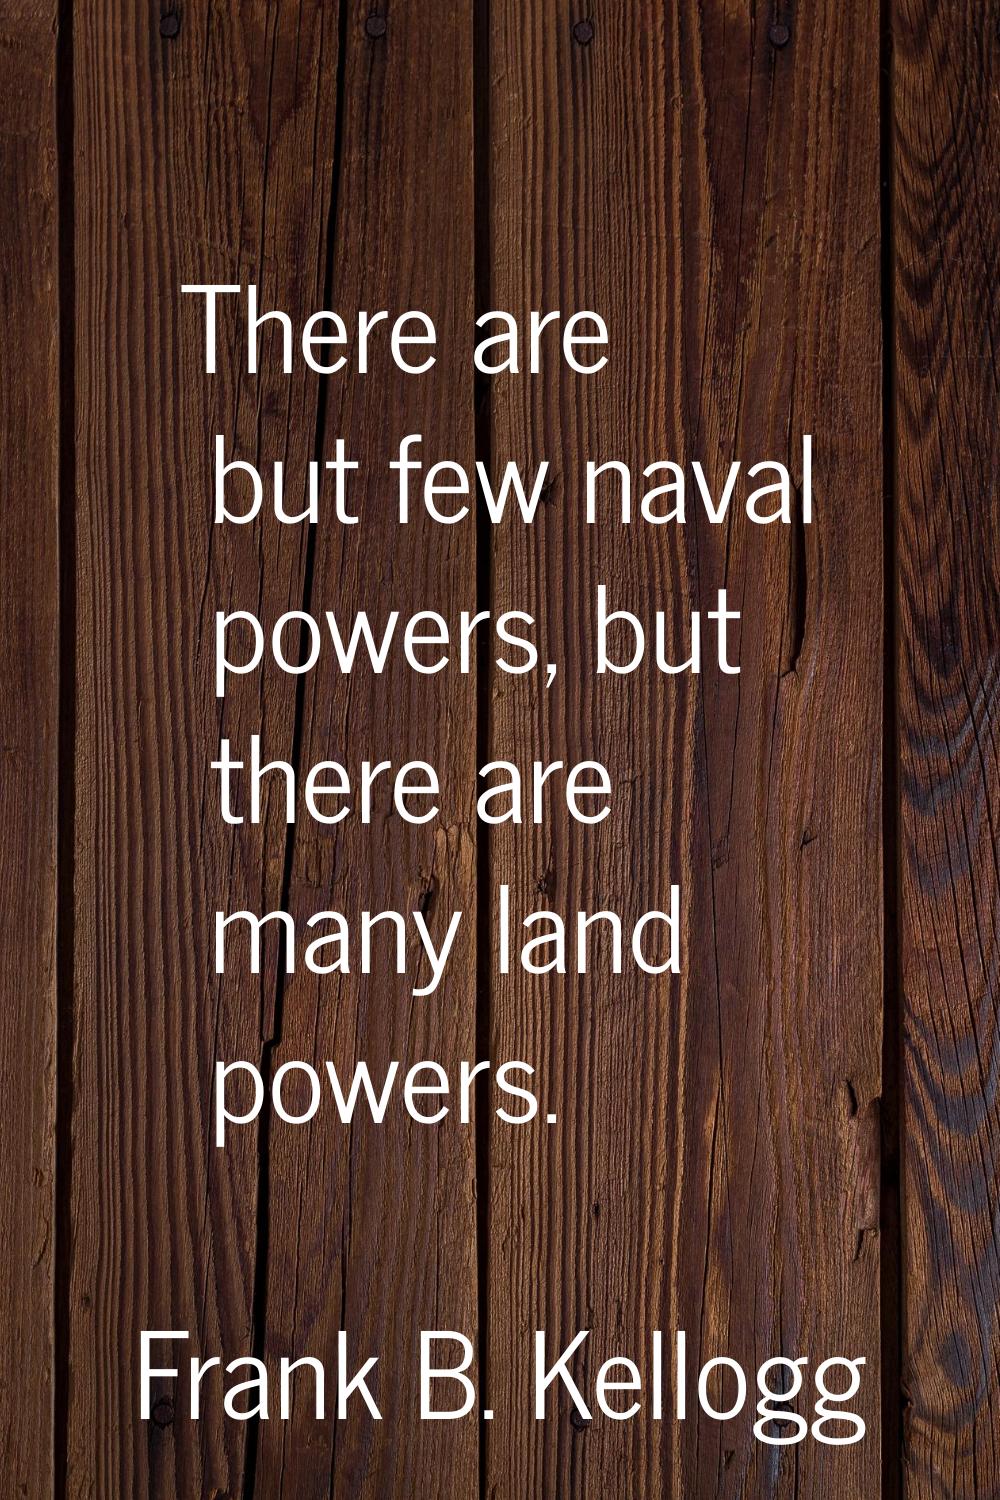 There are but few naval powers, but there are many land powers.